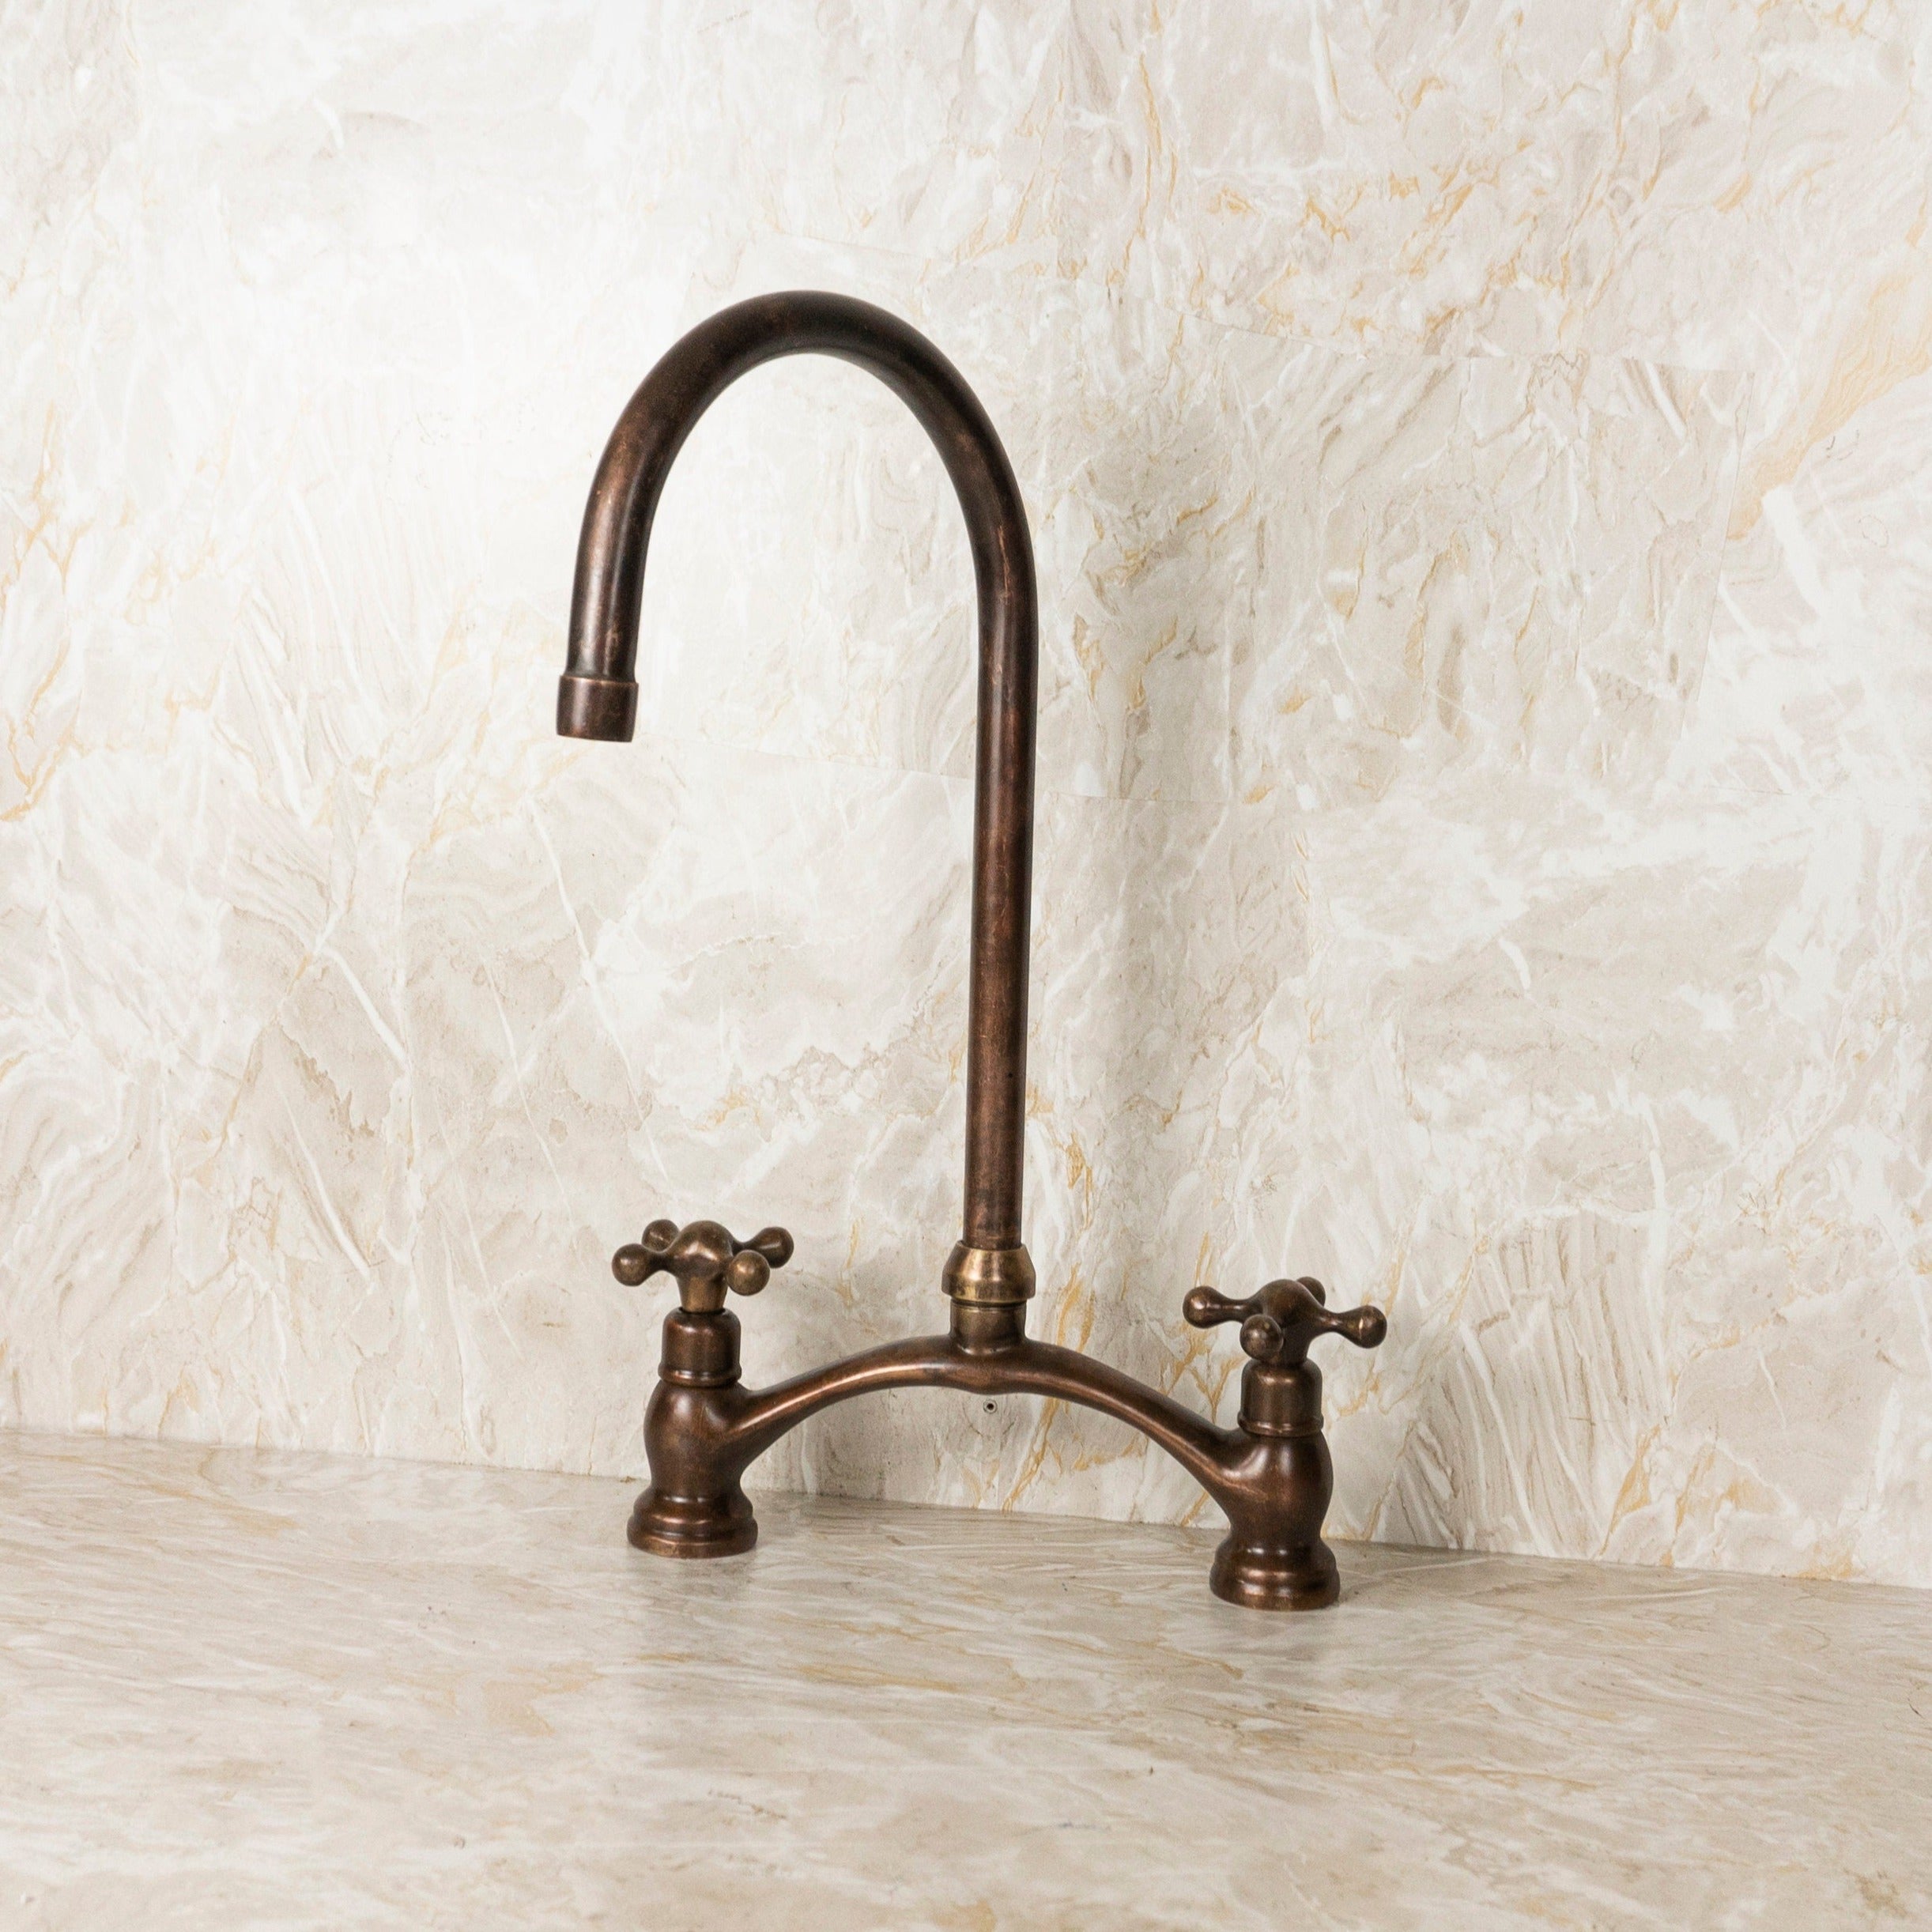 Aged Copper Kitchen Faucet Zayian 